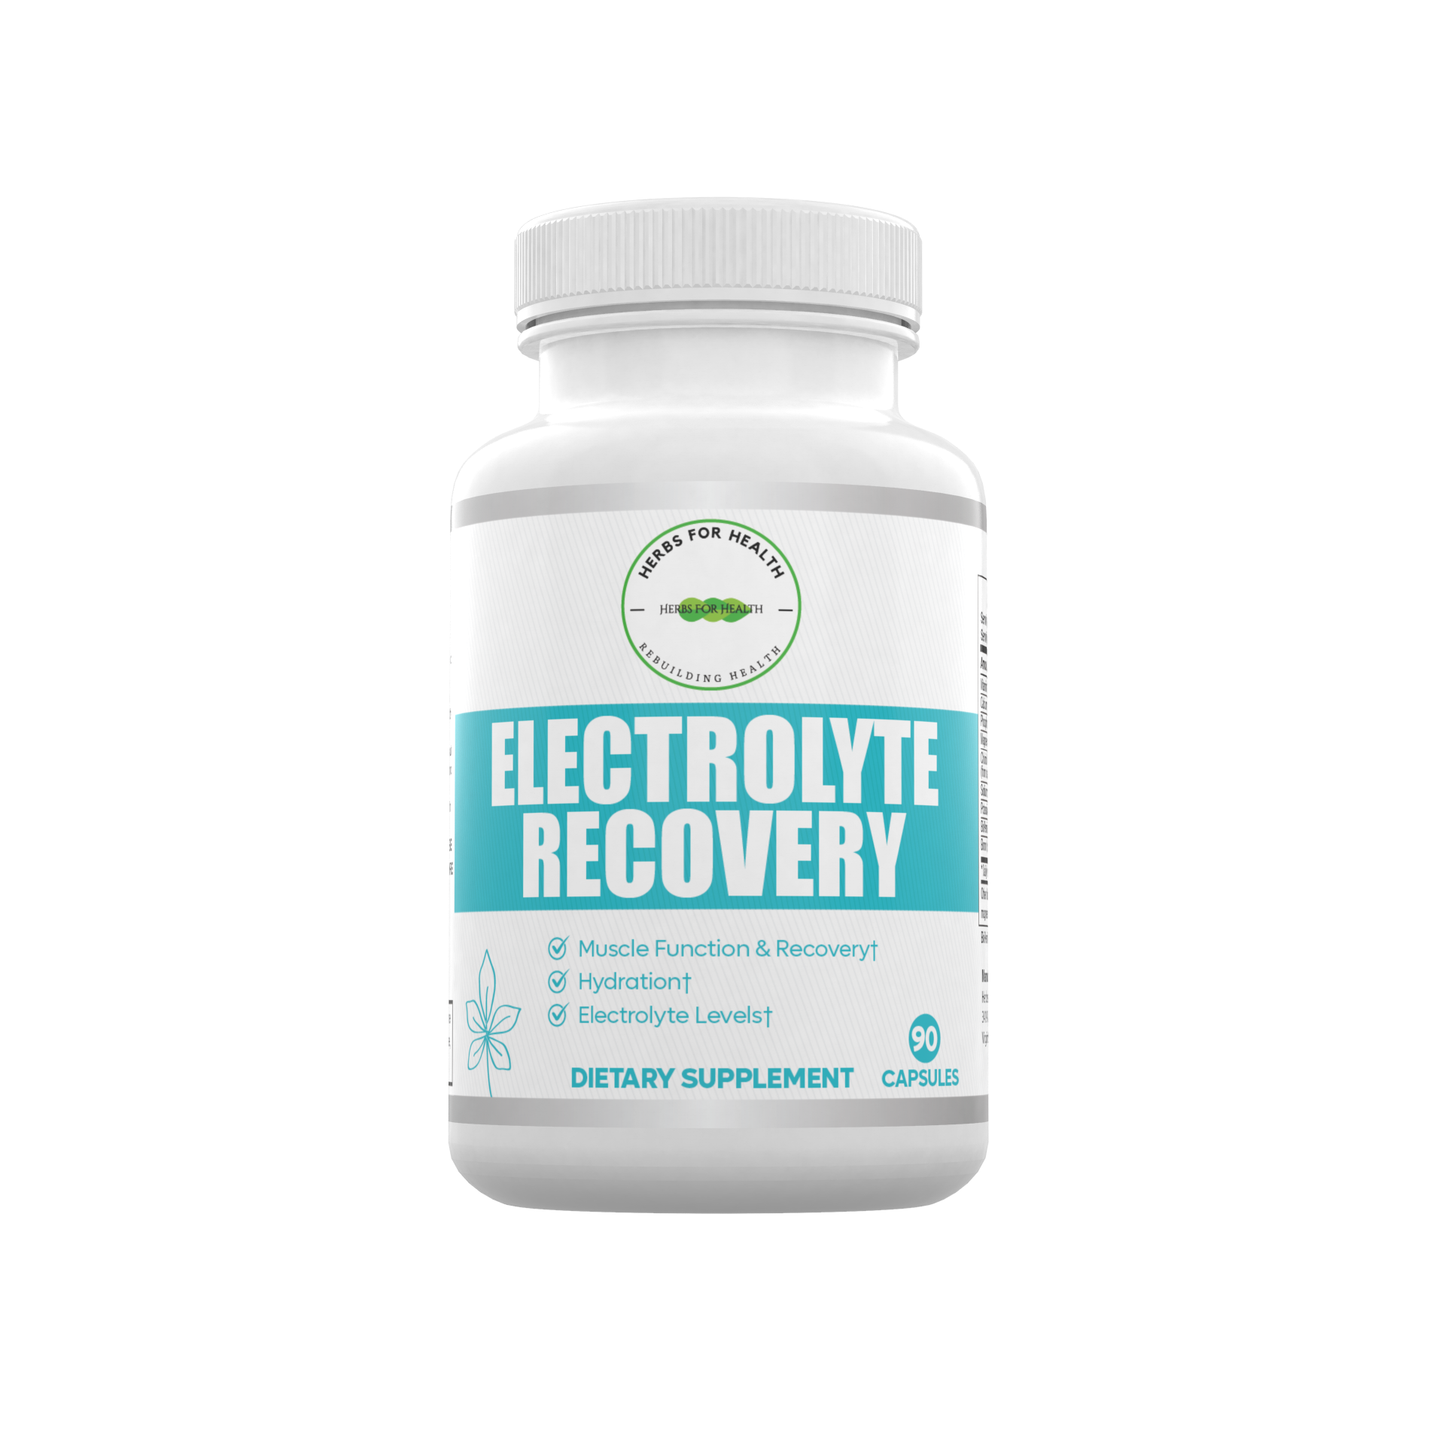 Electrolyte Recovery - Herbs For Health